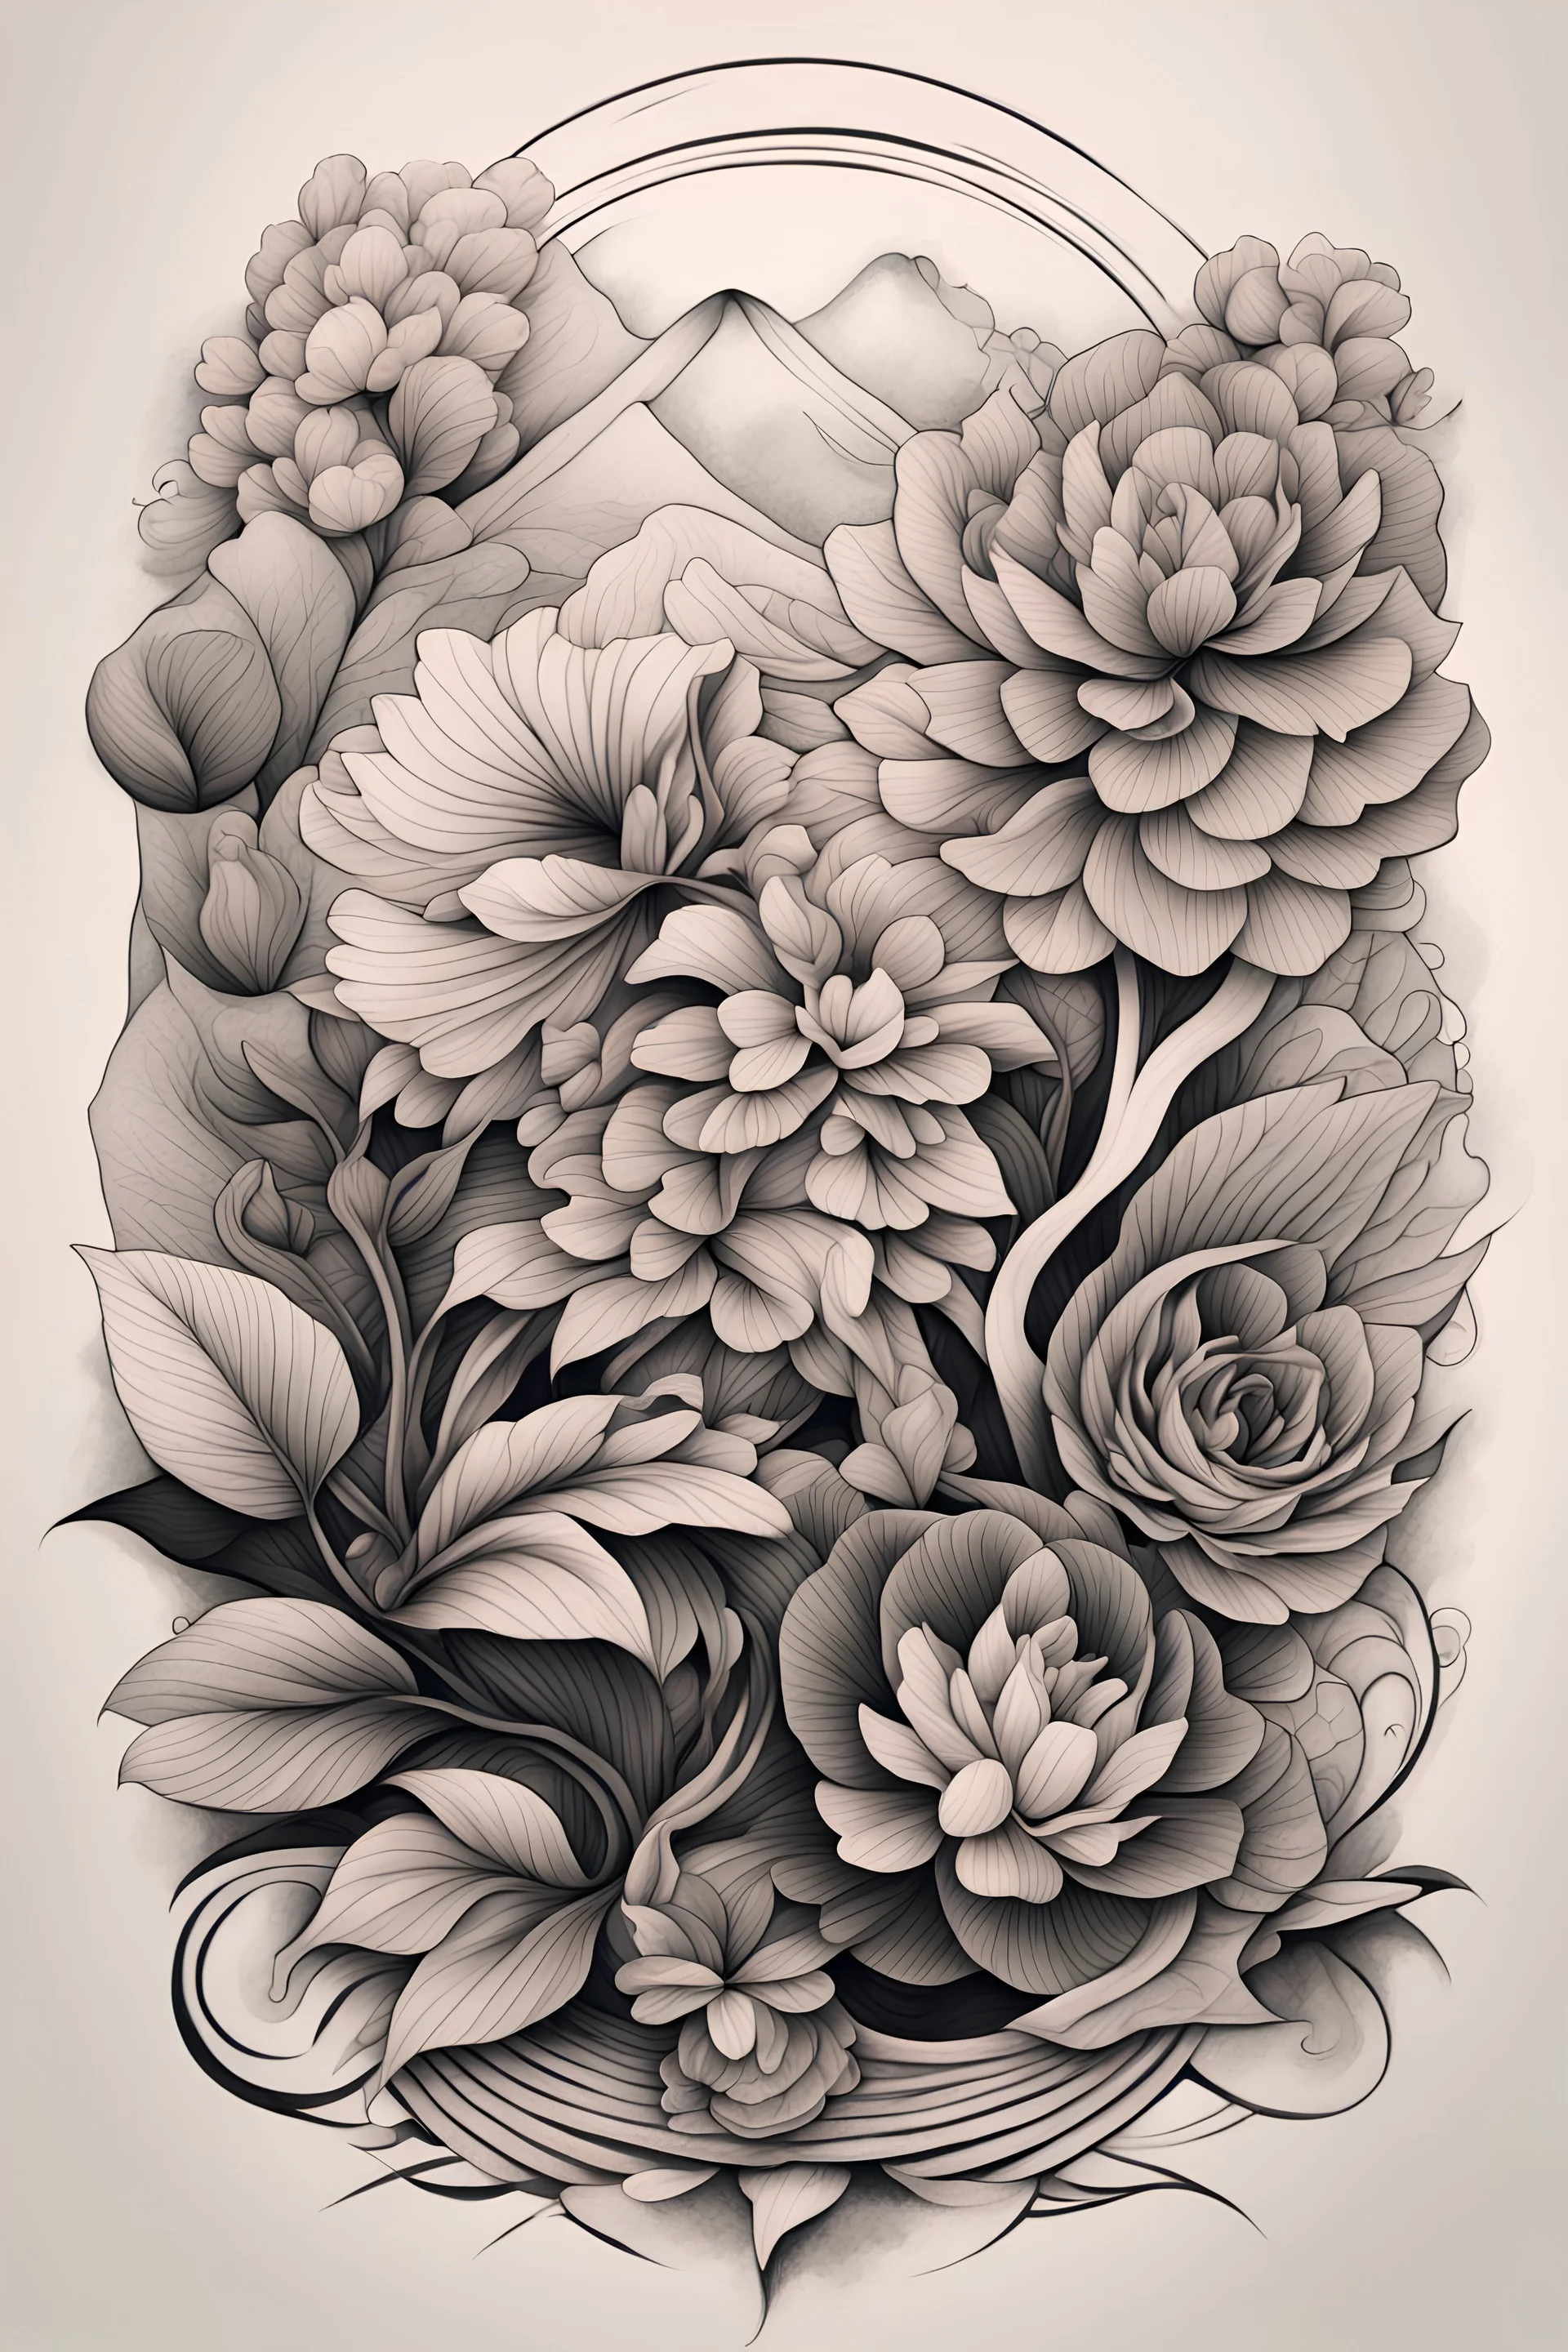 floral tattoos Archives - Visions Tattoo and Piercing